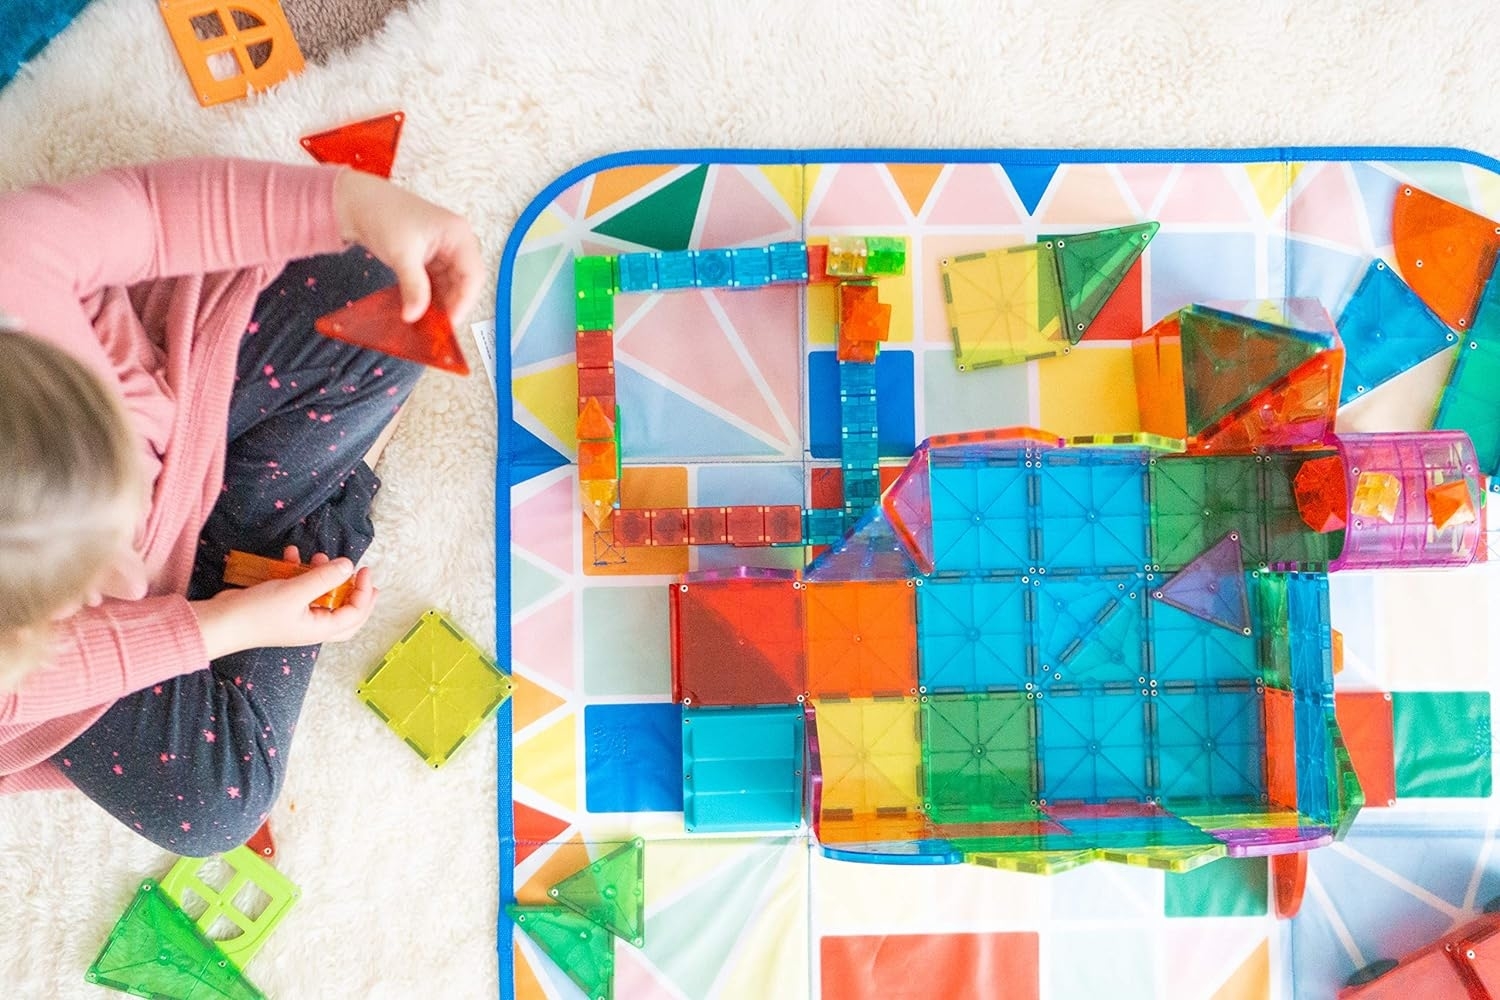 Child playing with colorful magnetic building blocks on floor